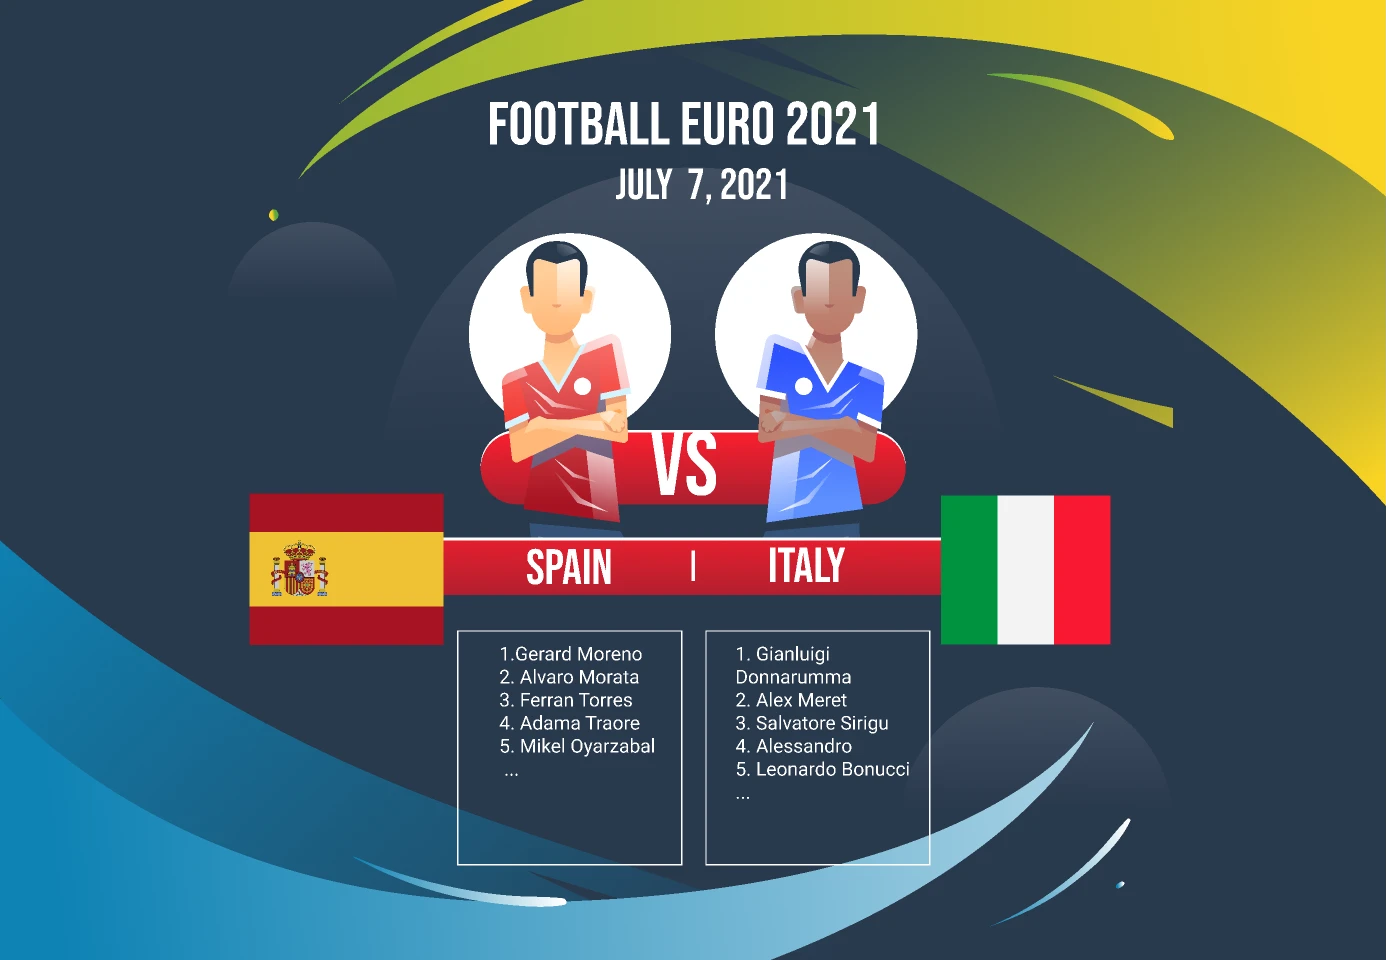 Football euro 2021 for Figma and Adobe XD